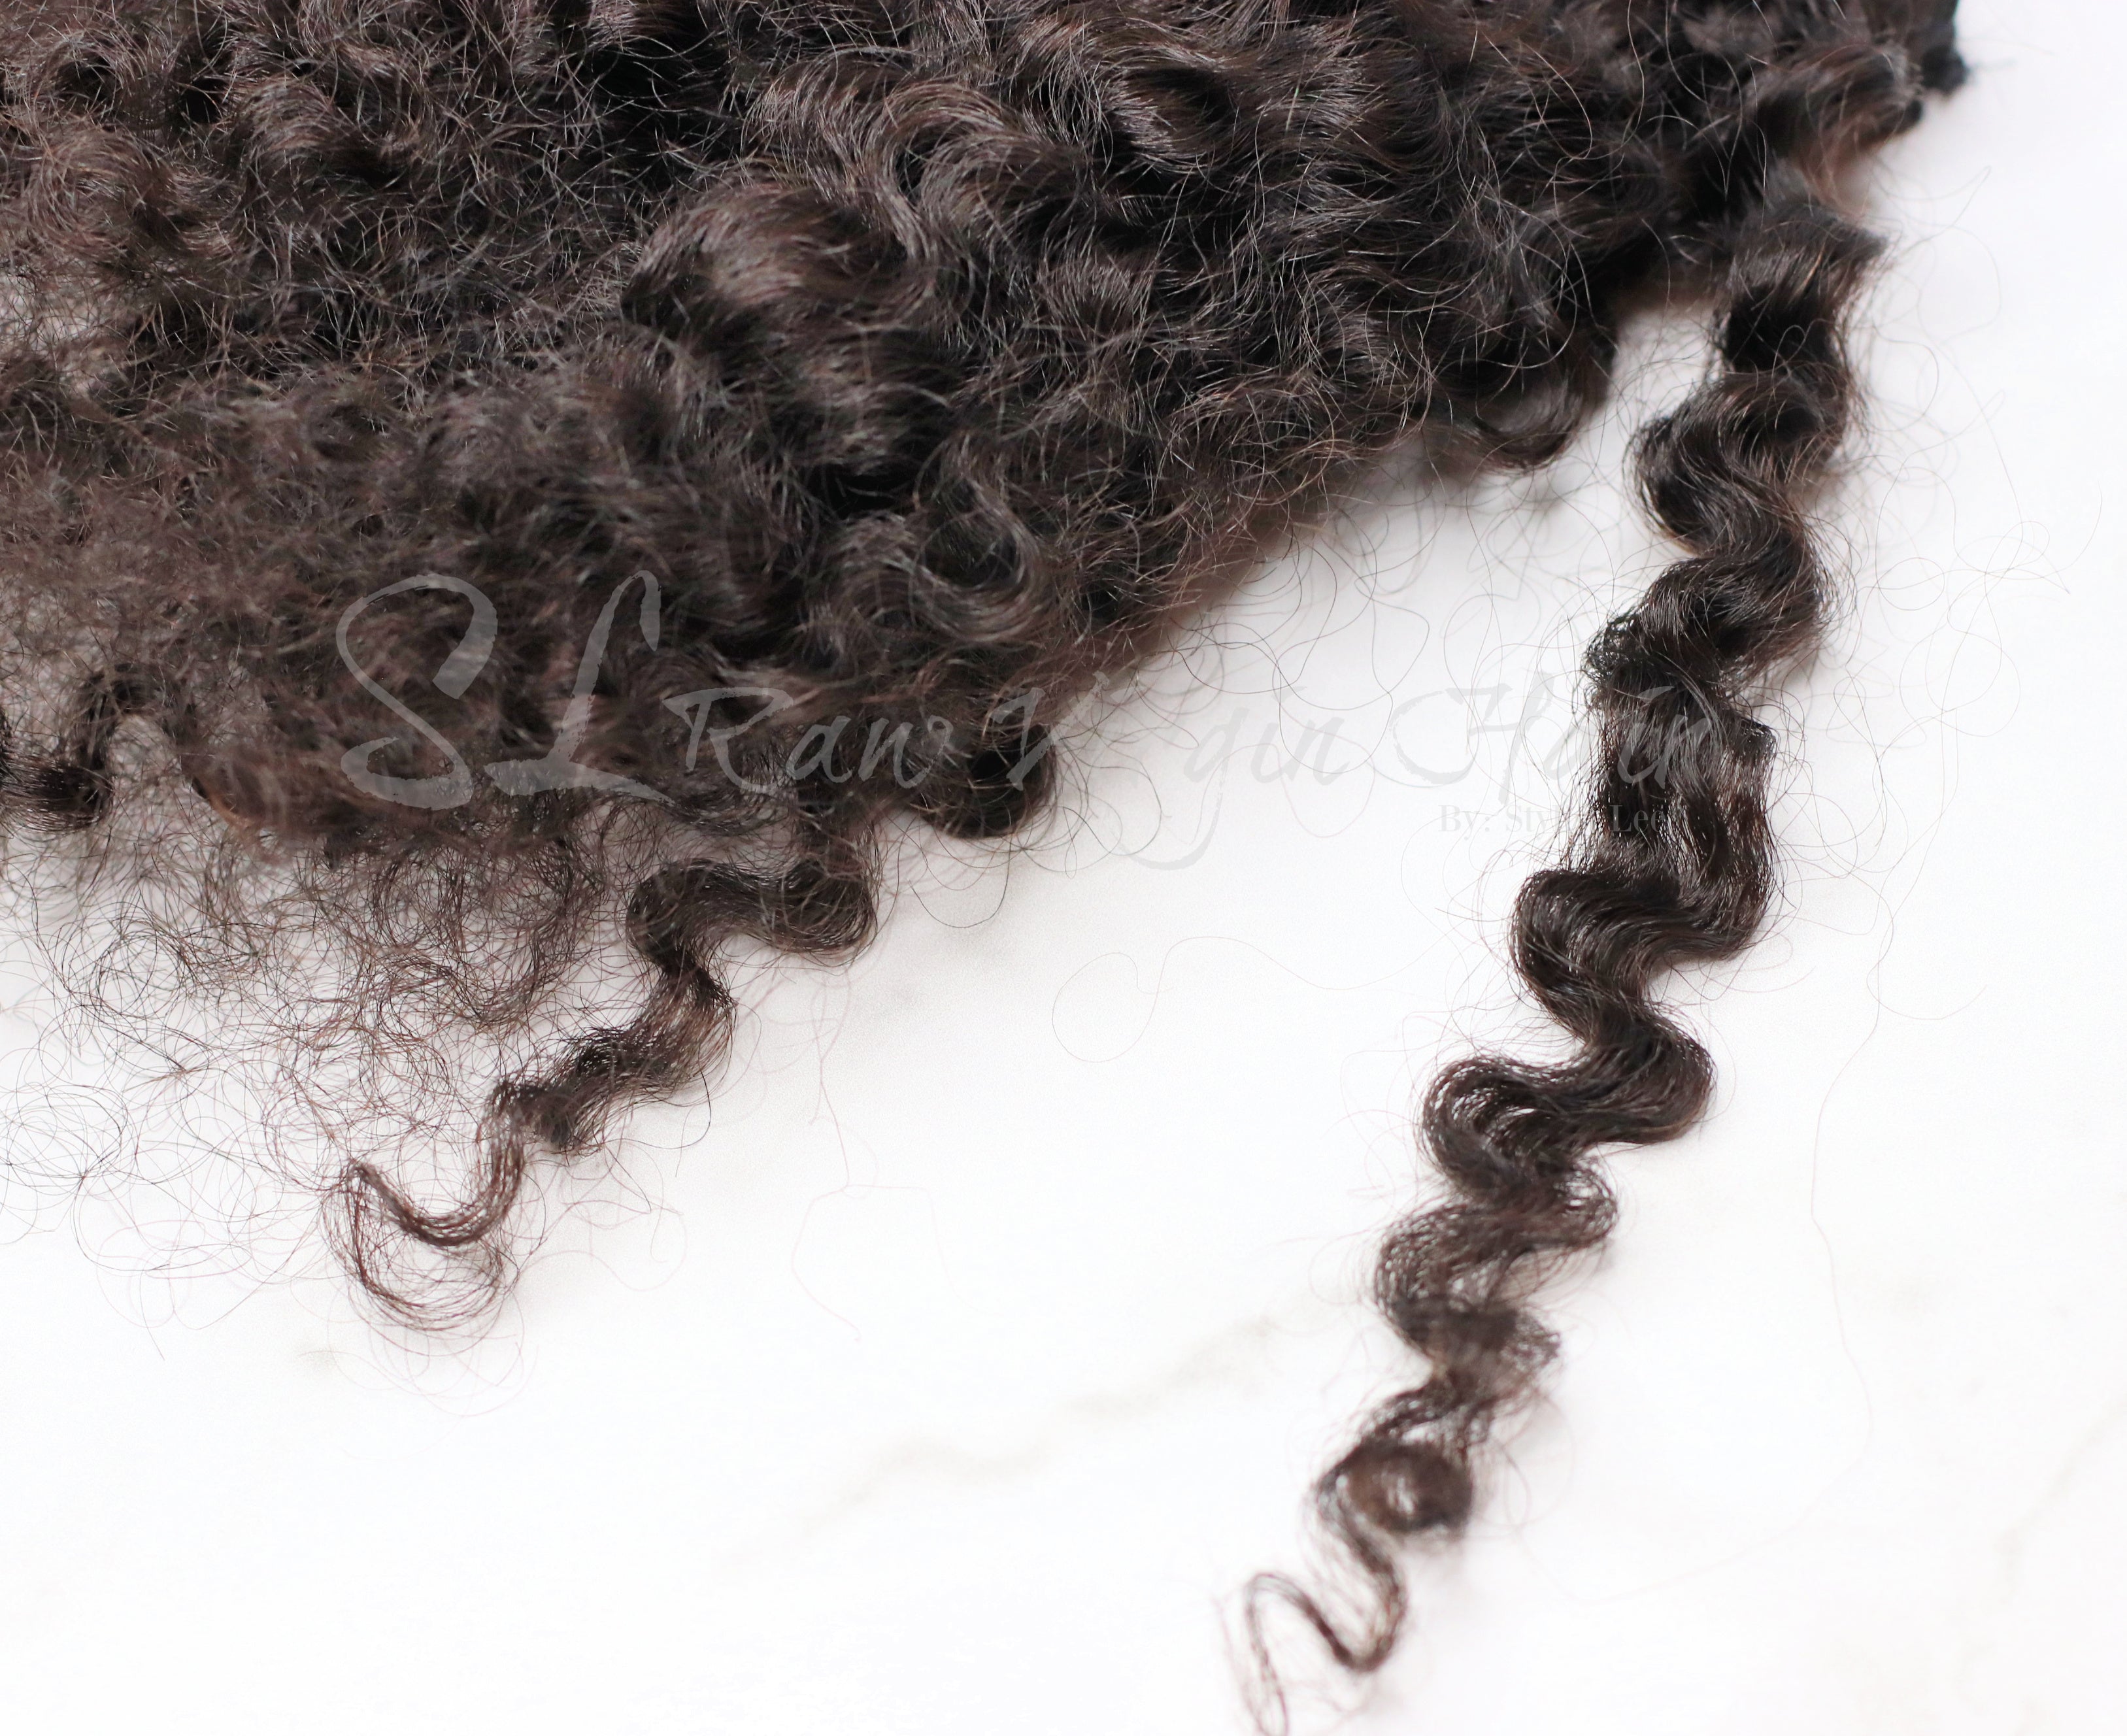 Image of Burma hair curly swatch matches curl patter 3a-3c. Perfect curly for any season. Ony sold by SL Raw Virgin Hair in 100 gram bundles. SL Raw Virgin hair 